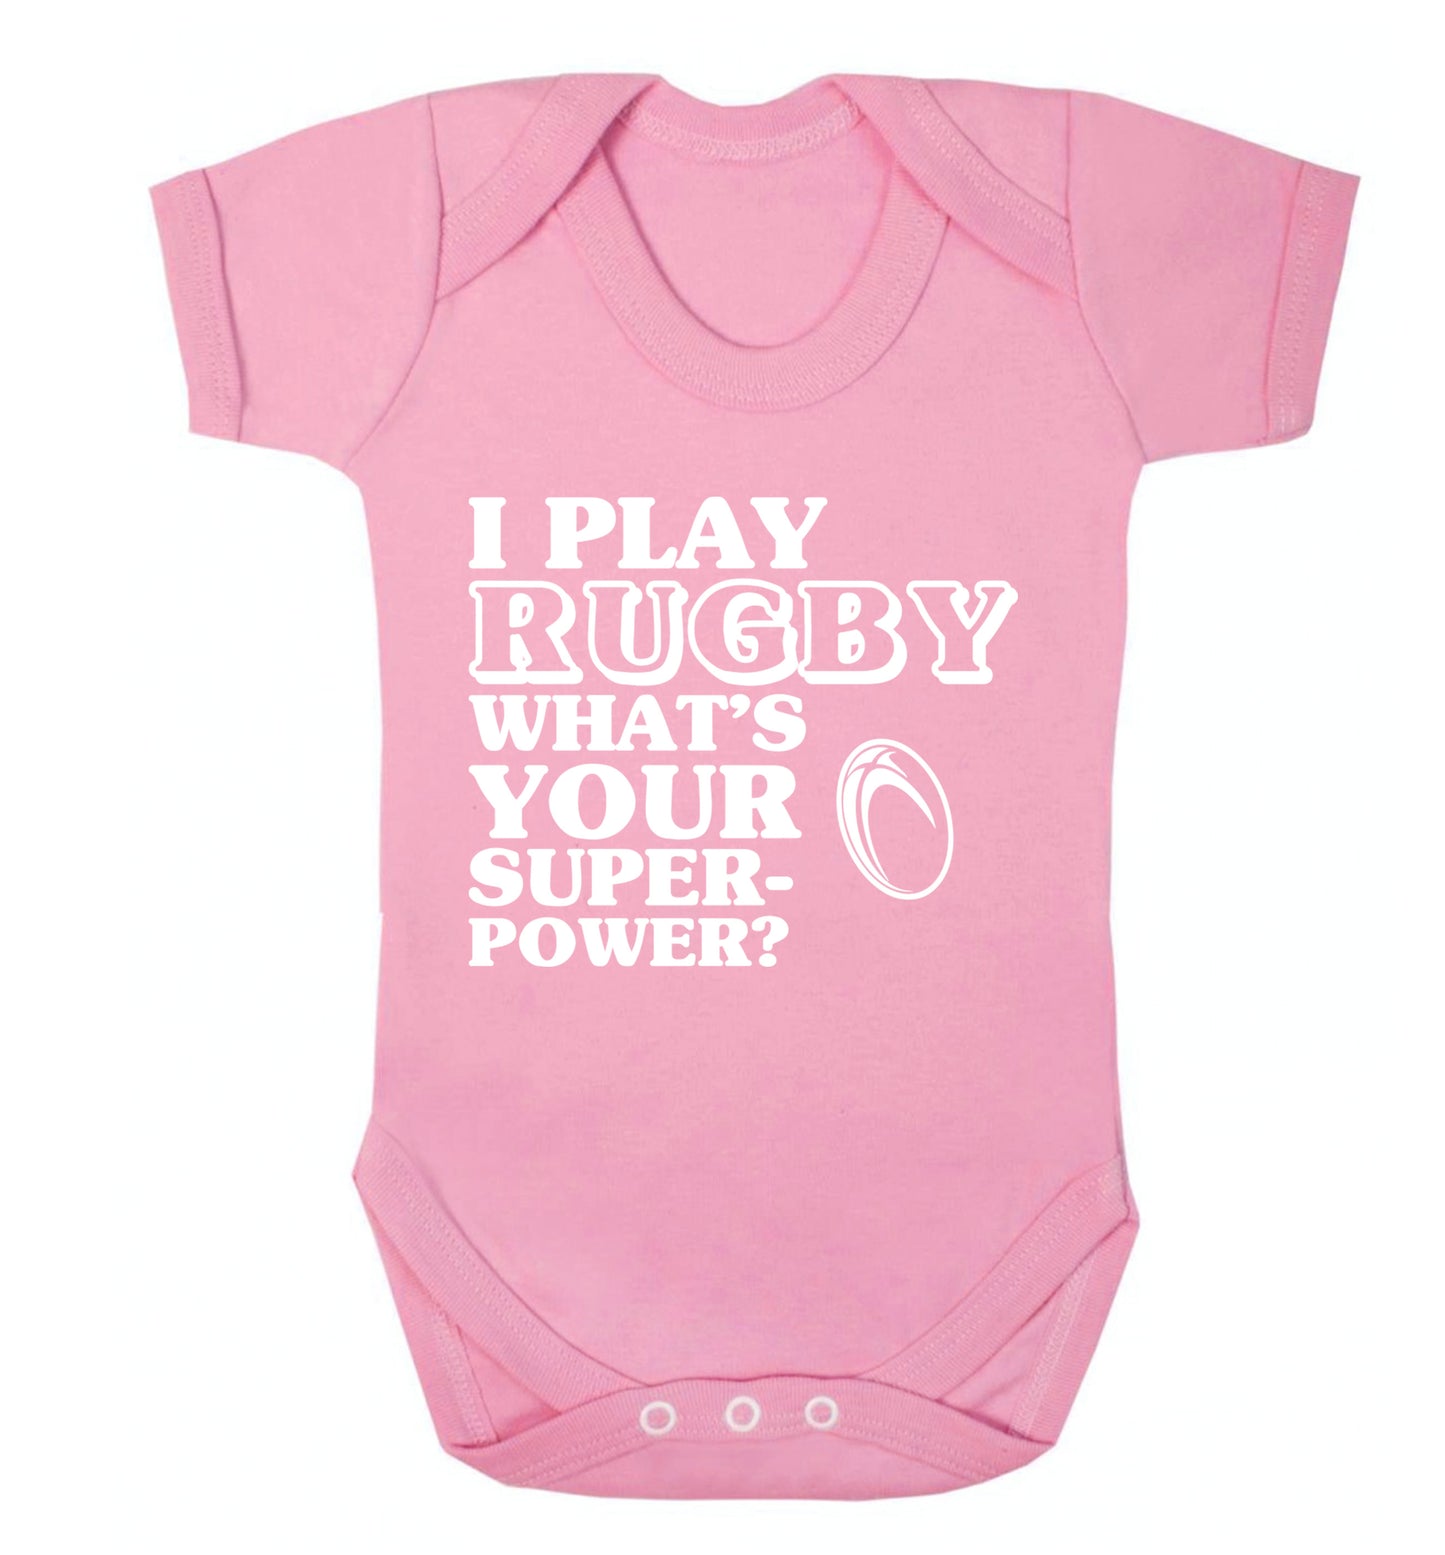 I play rugby what's your superpower? Baby Vest pale pink 18-24 months